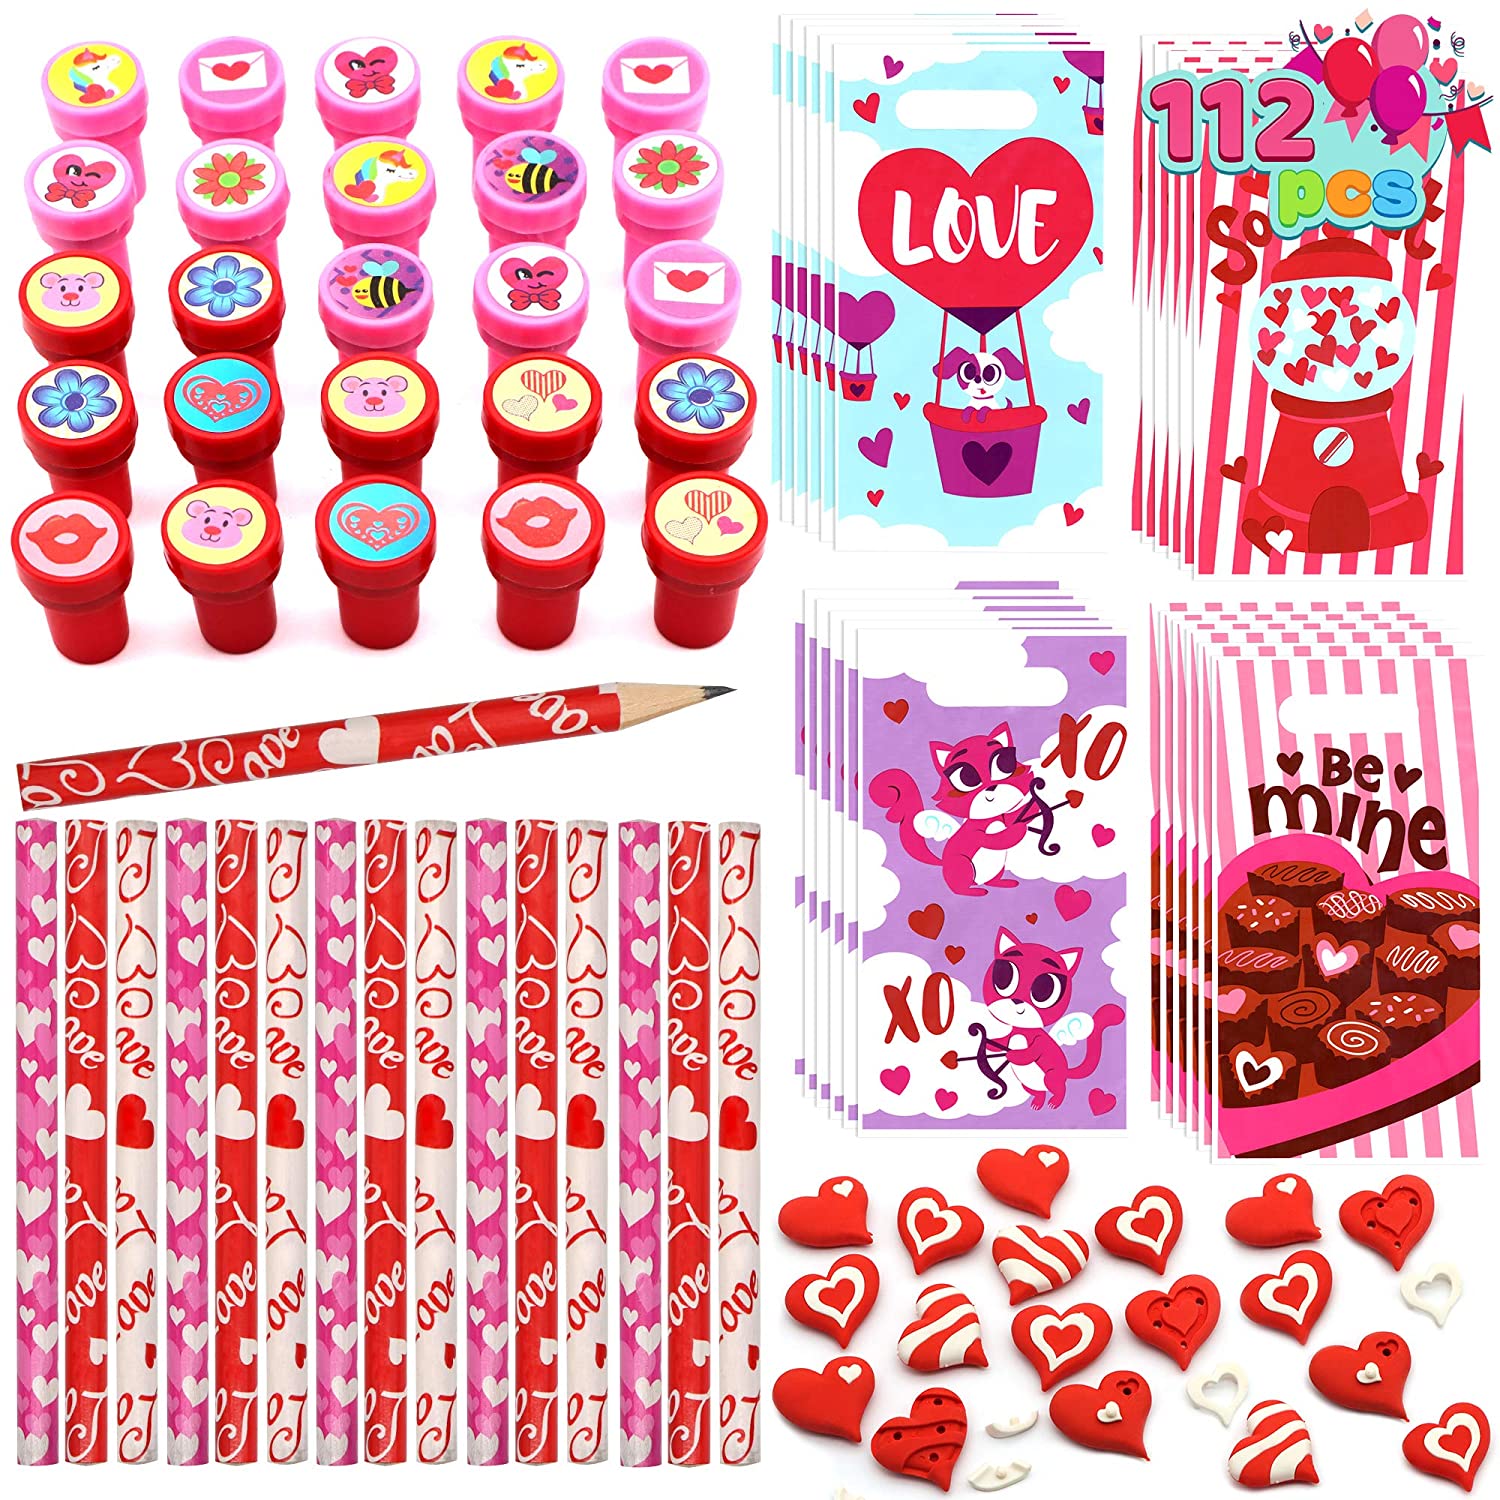 28 Pcs Valentines Day School Gifts Stationery Set for Kids